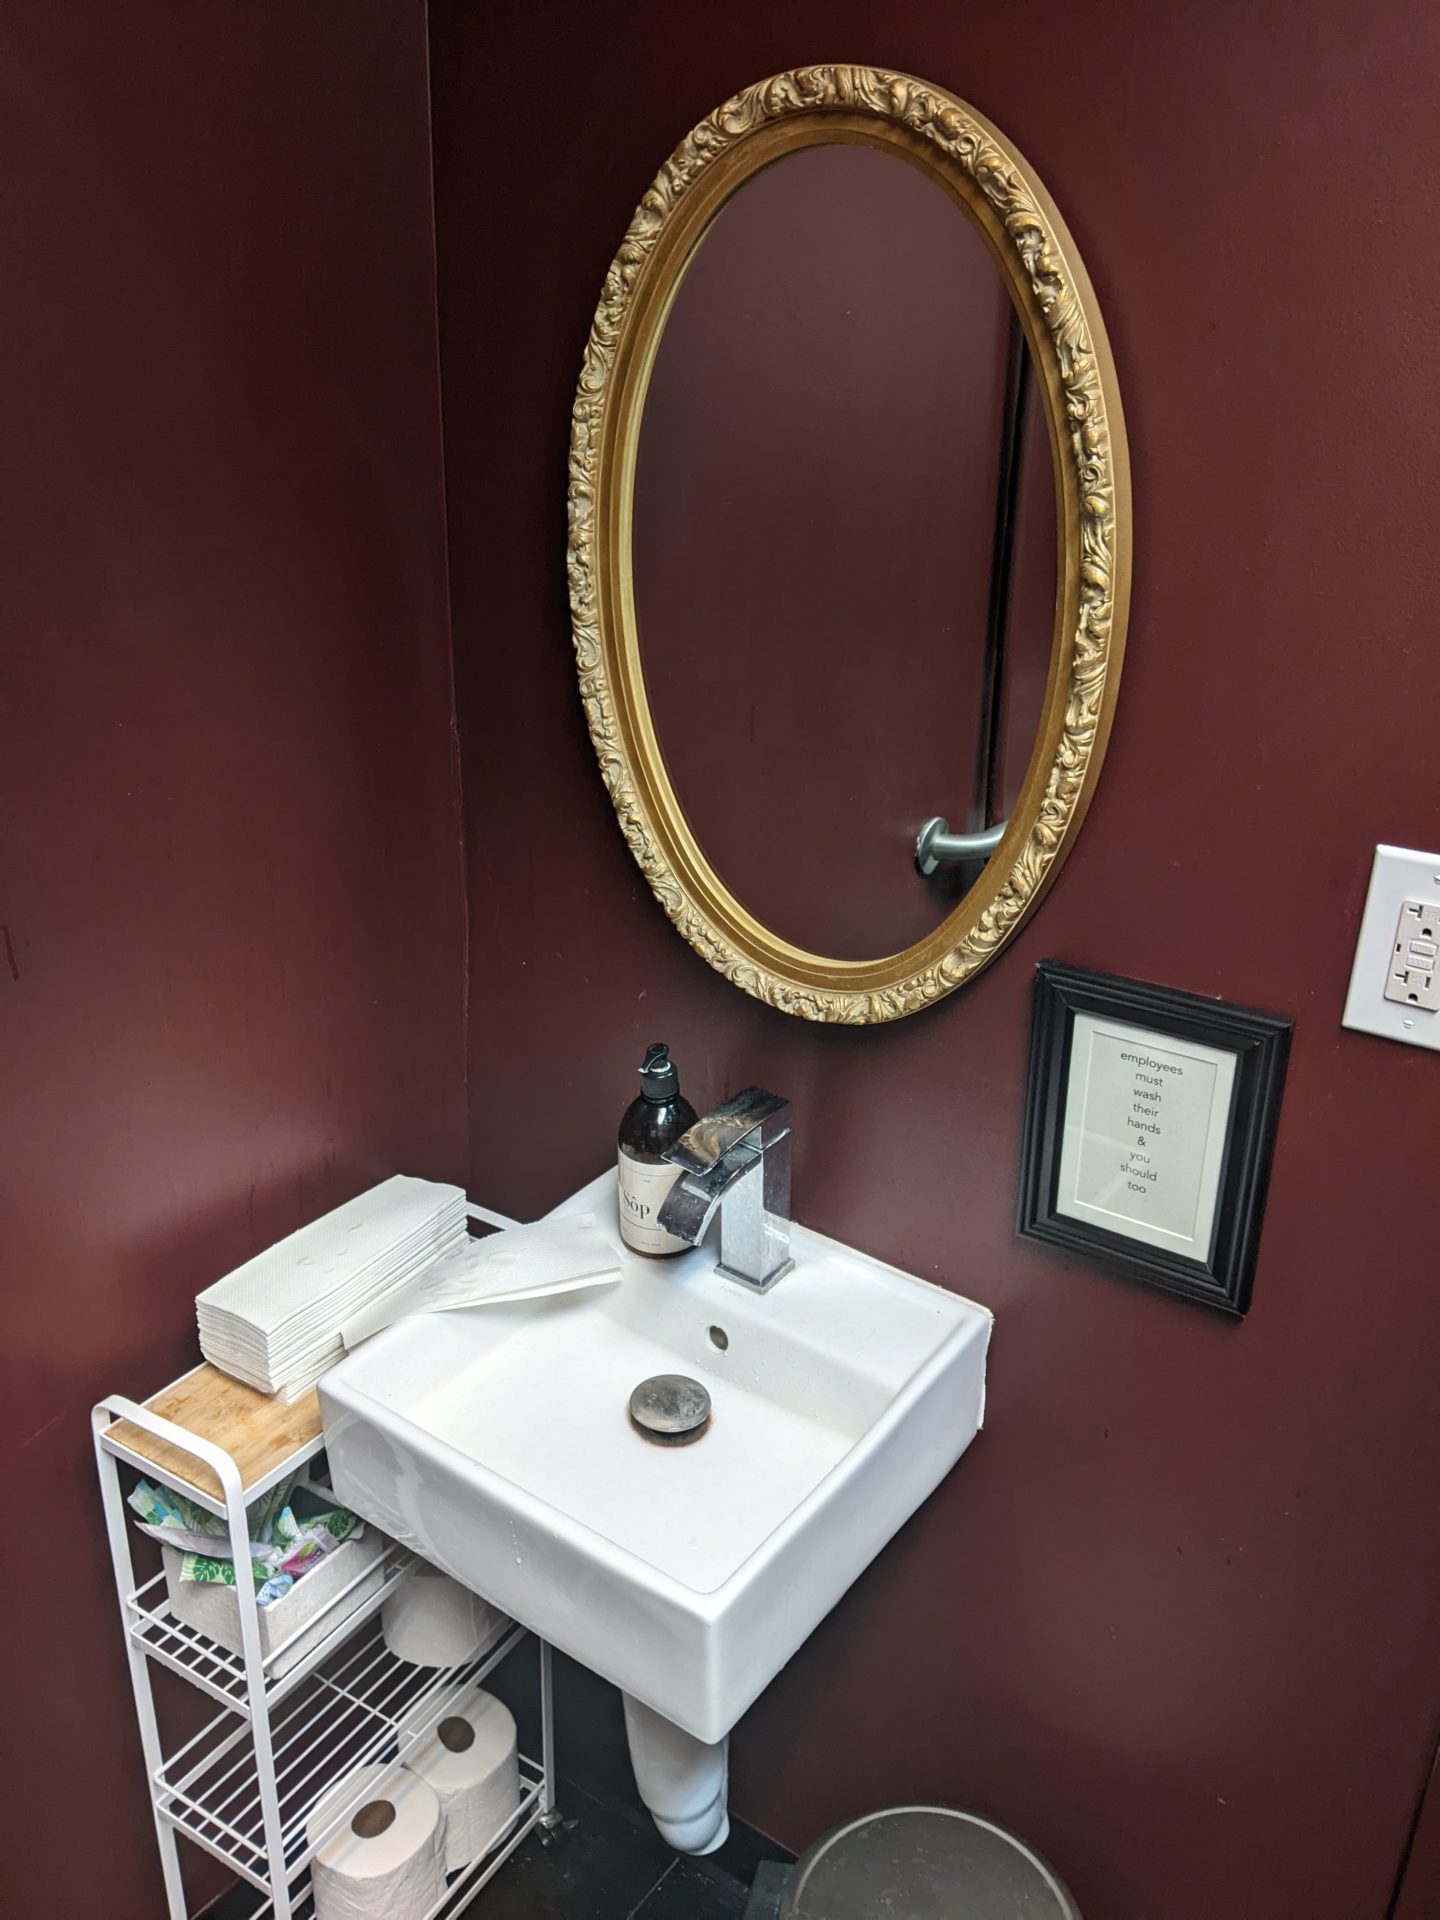 A small square white sink is in the corner of a small room with dark burgundy walls. There is an oval mirror with a gold frame hanging over it. There is a rolling cart with shelves adjacent to the sink.